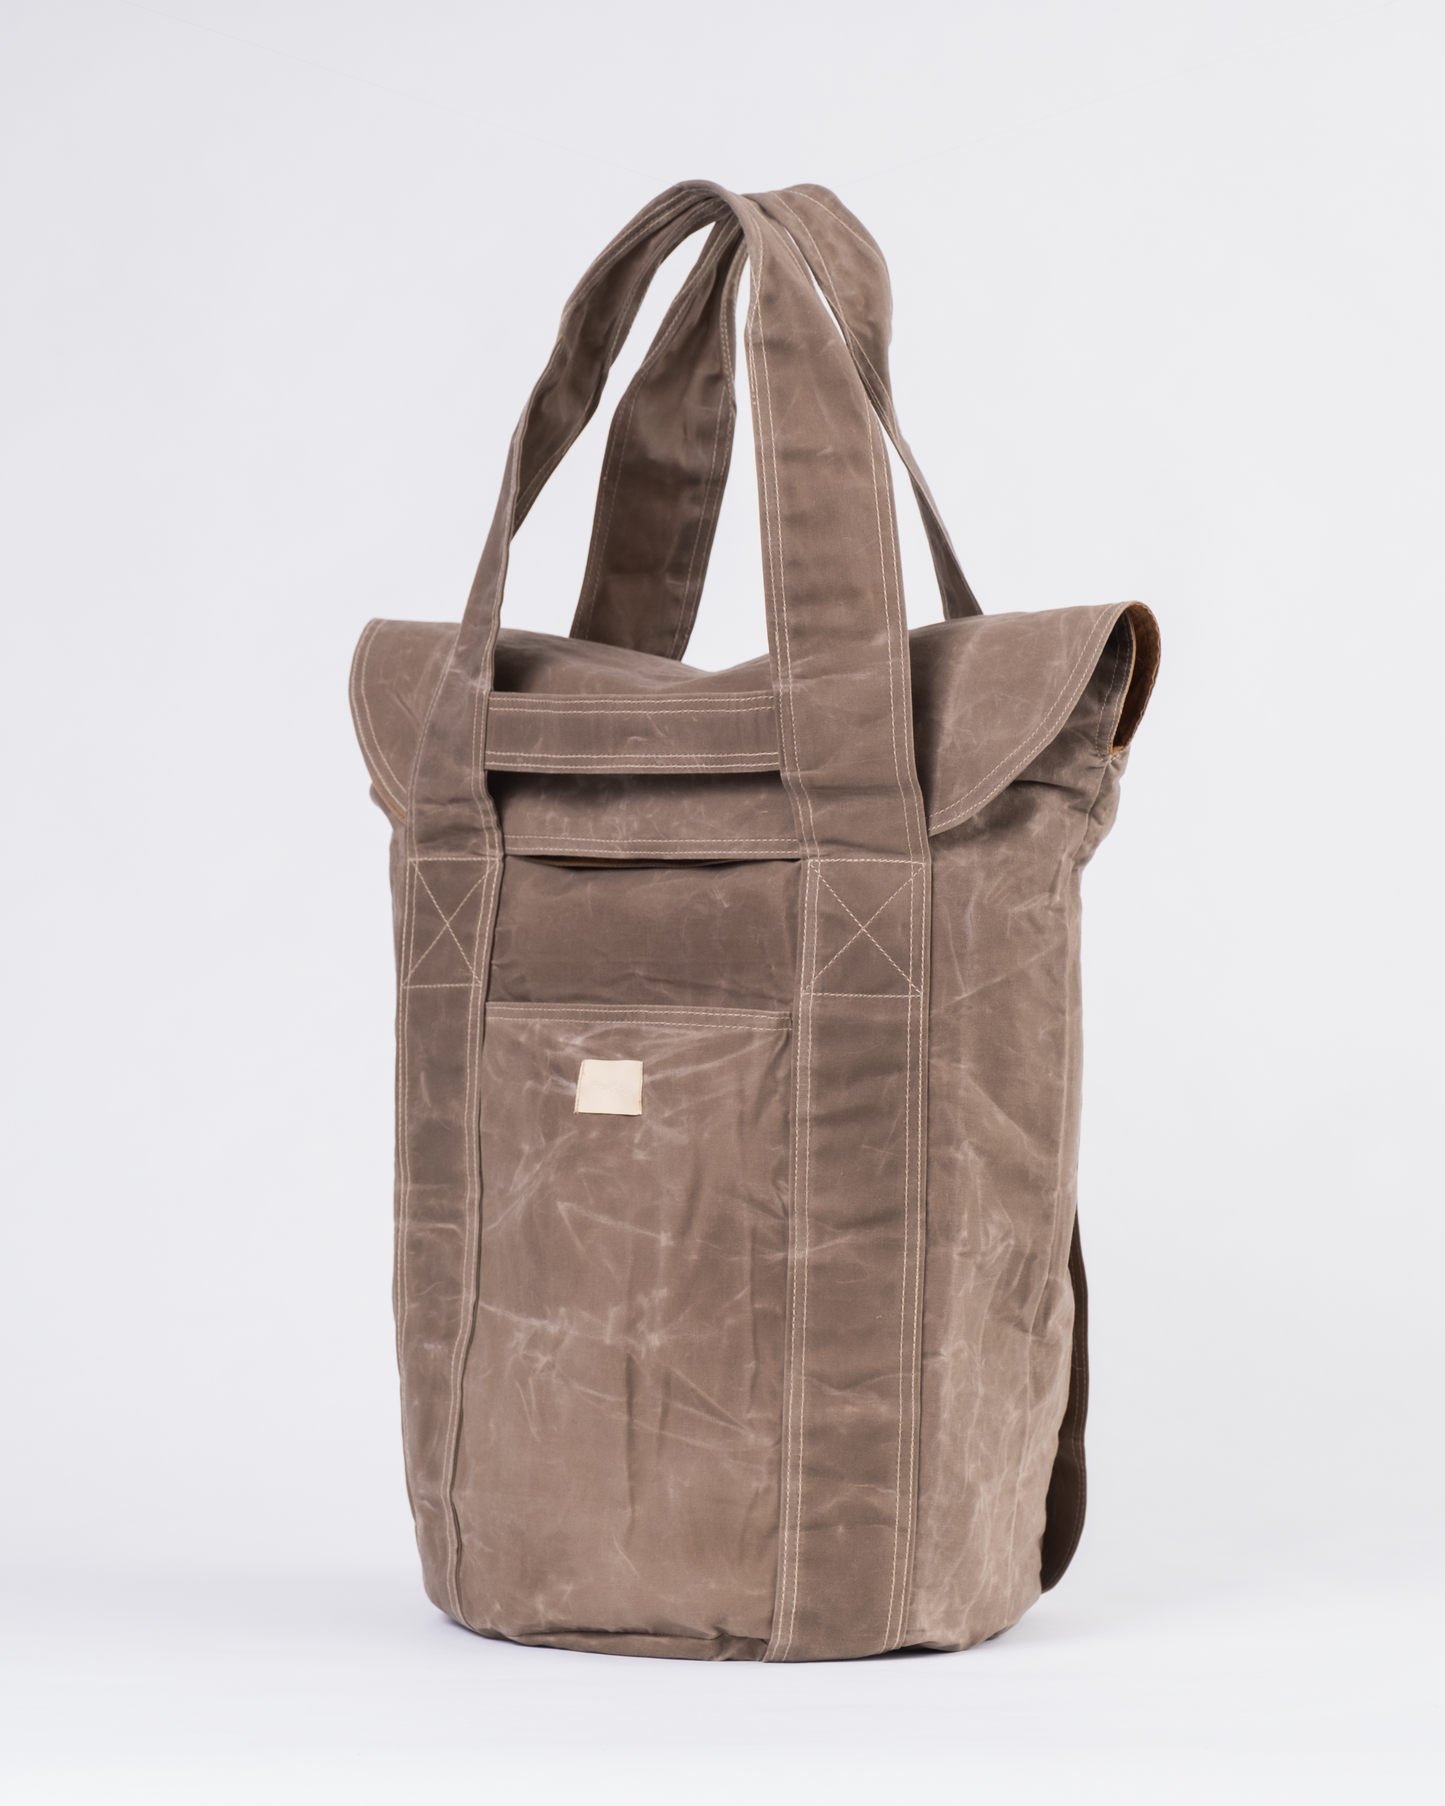 WORK TOTE - CEMENT (NEW!)